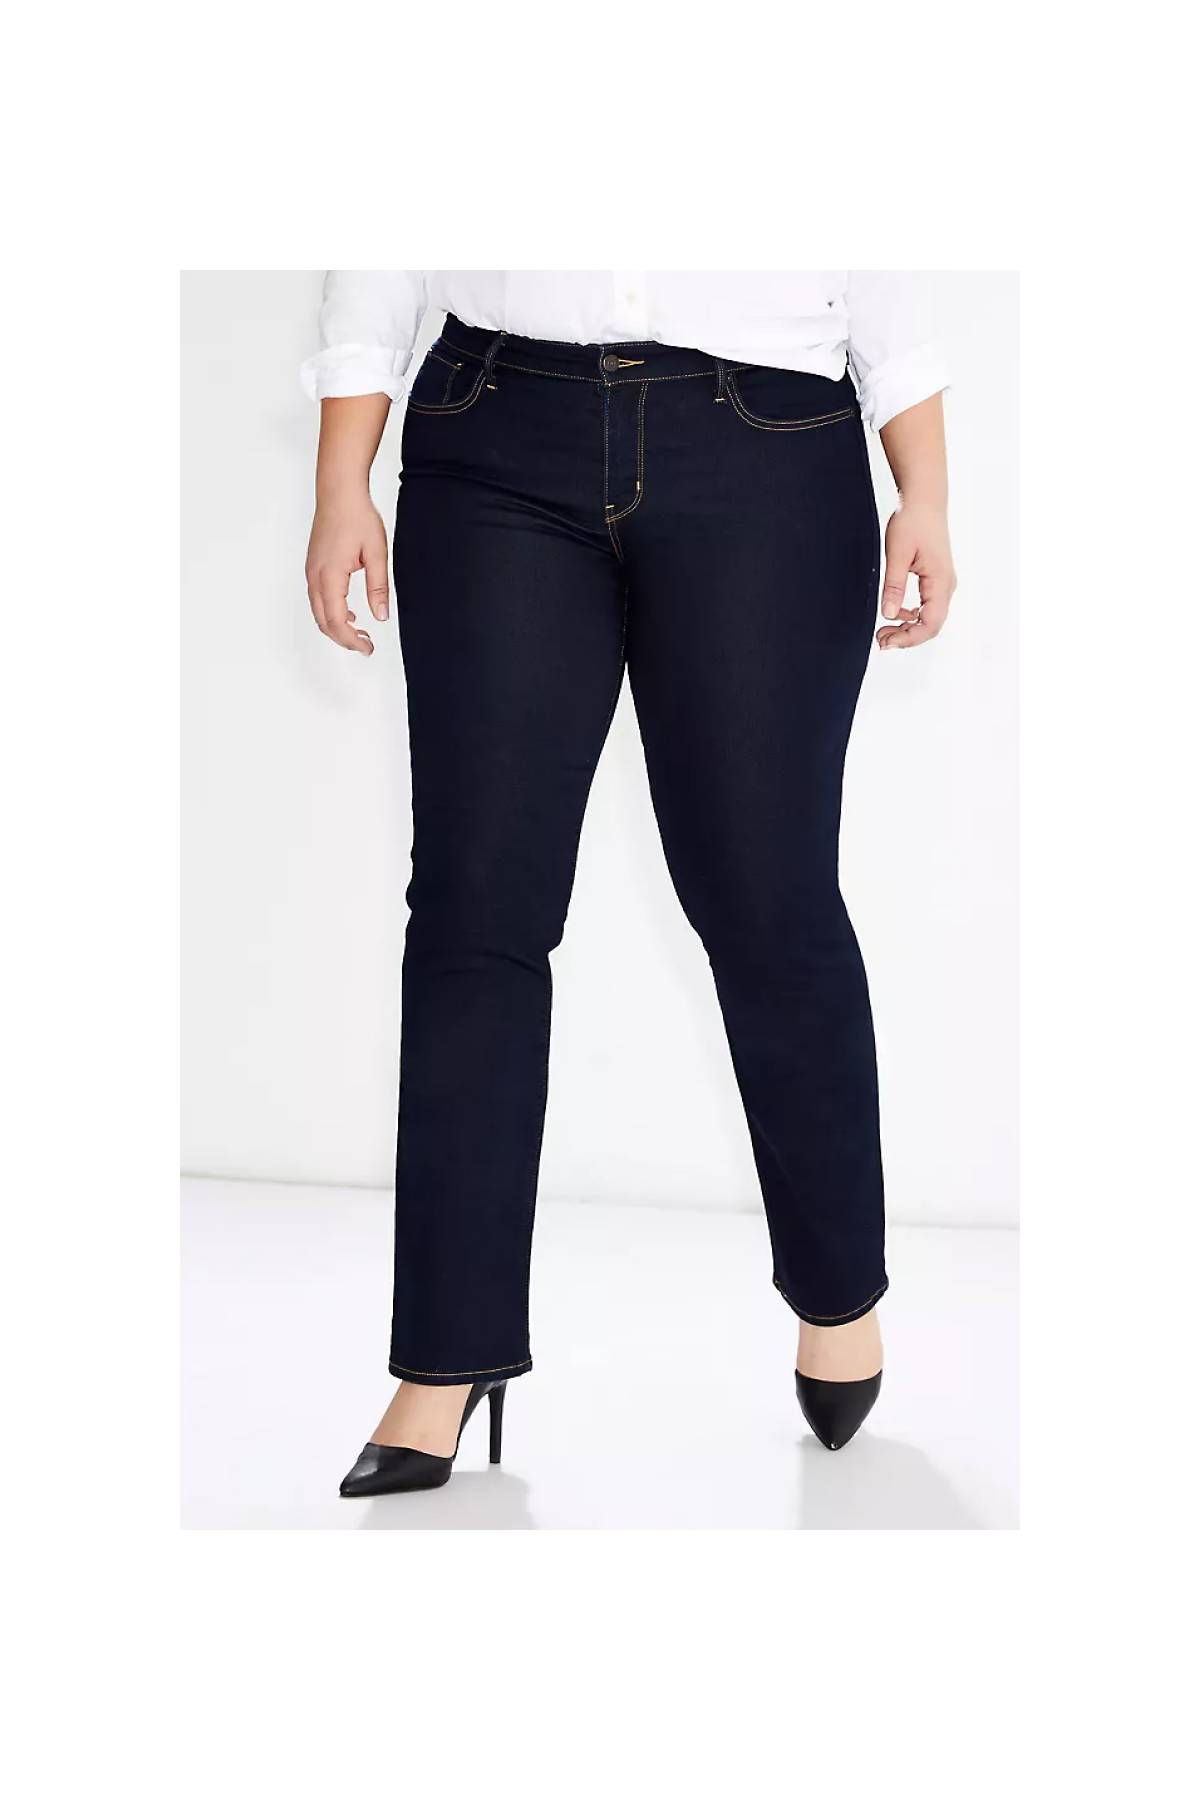 Women's Skinny Jeans High Waist Your Jeggings Shaping Straight